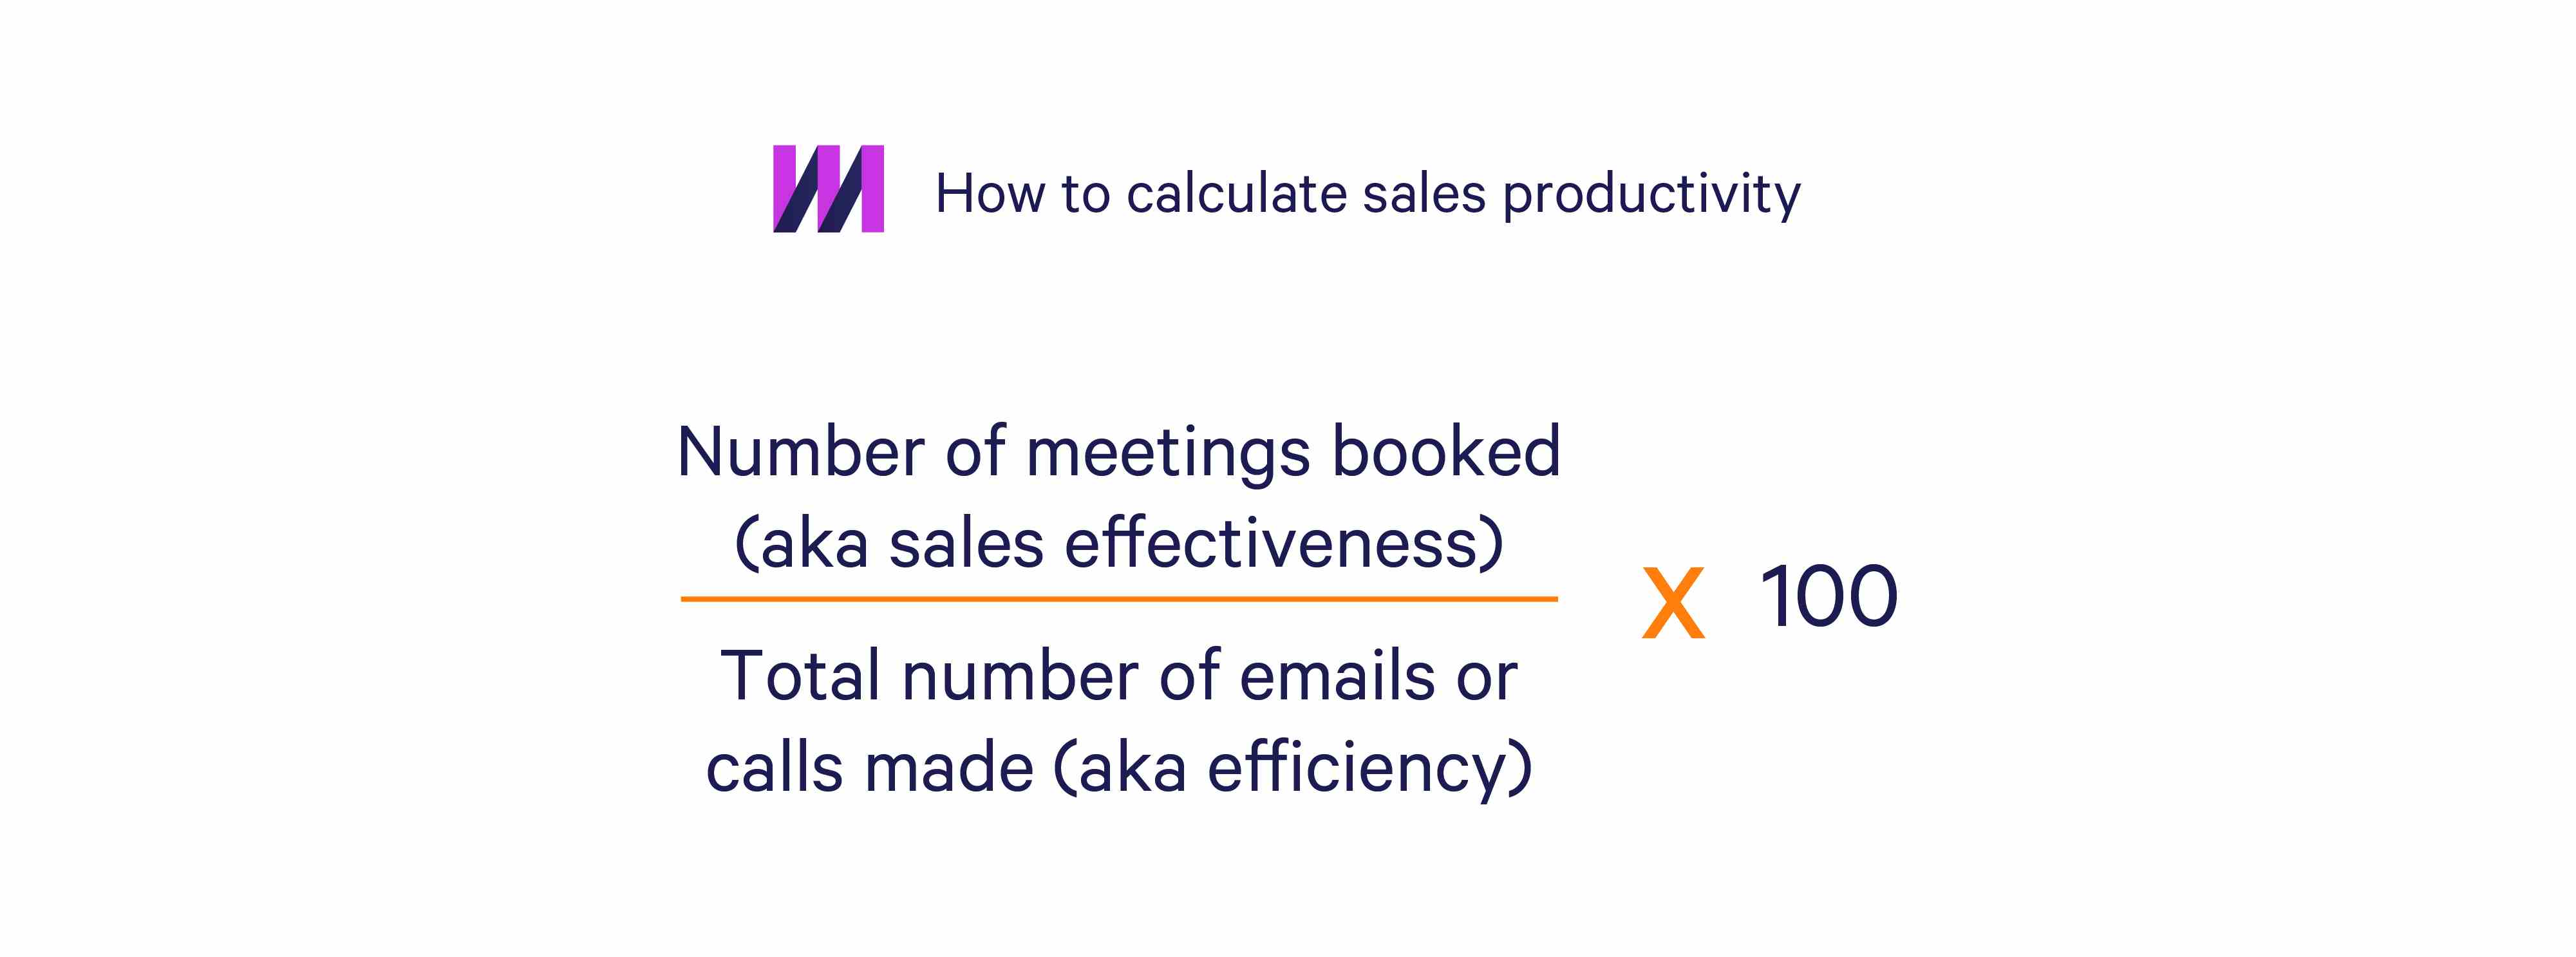 How to calculate sales productivity